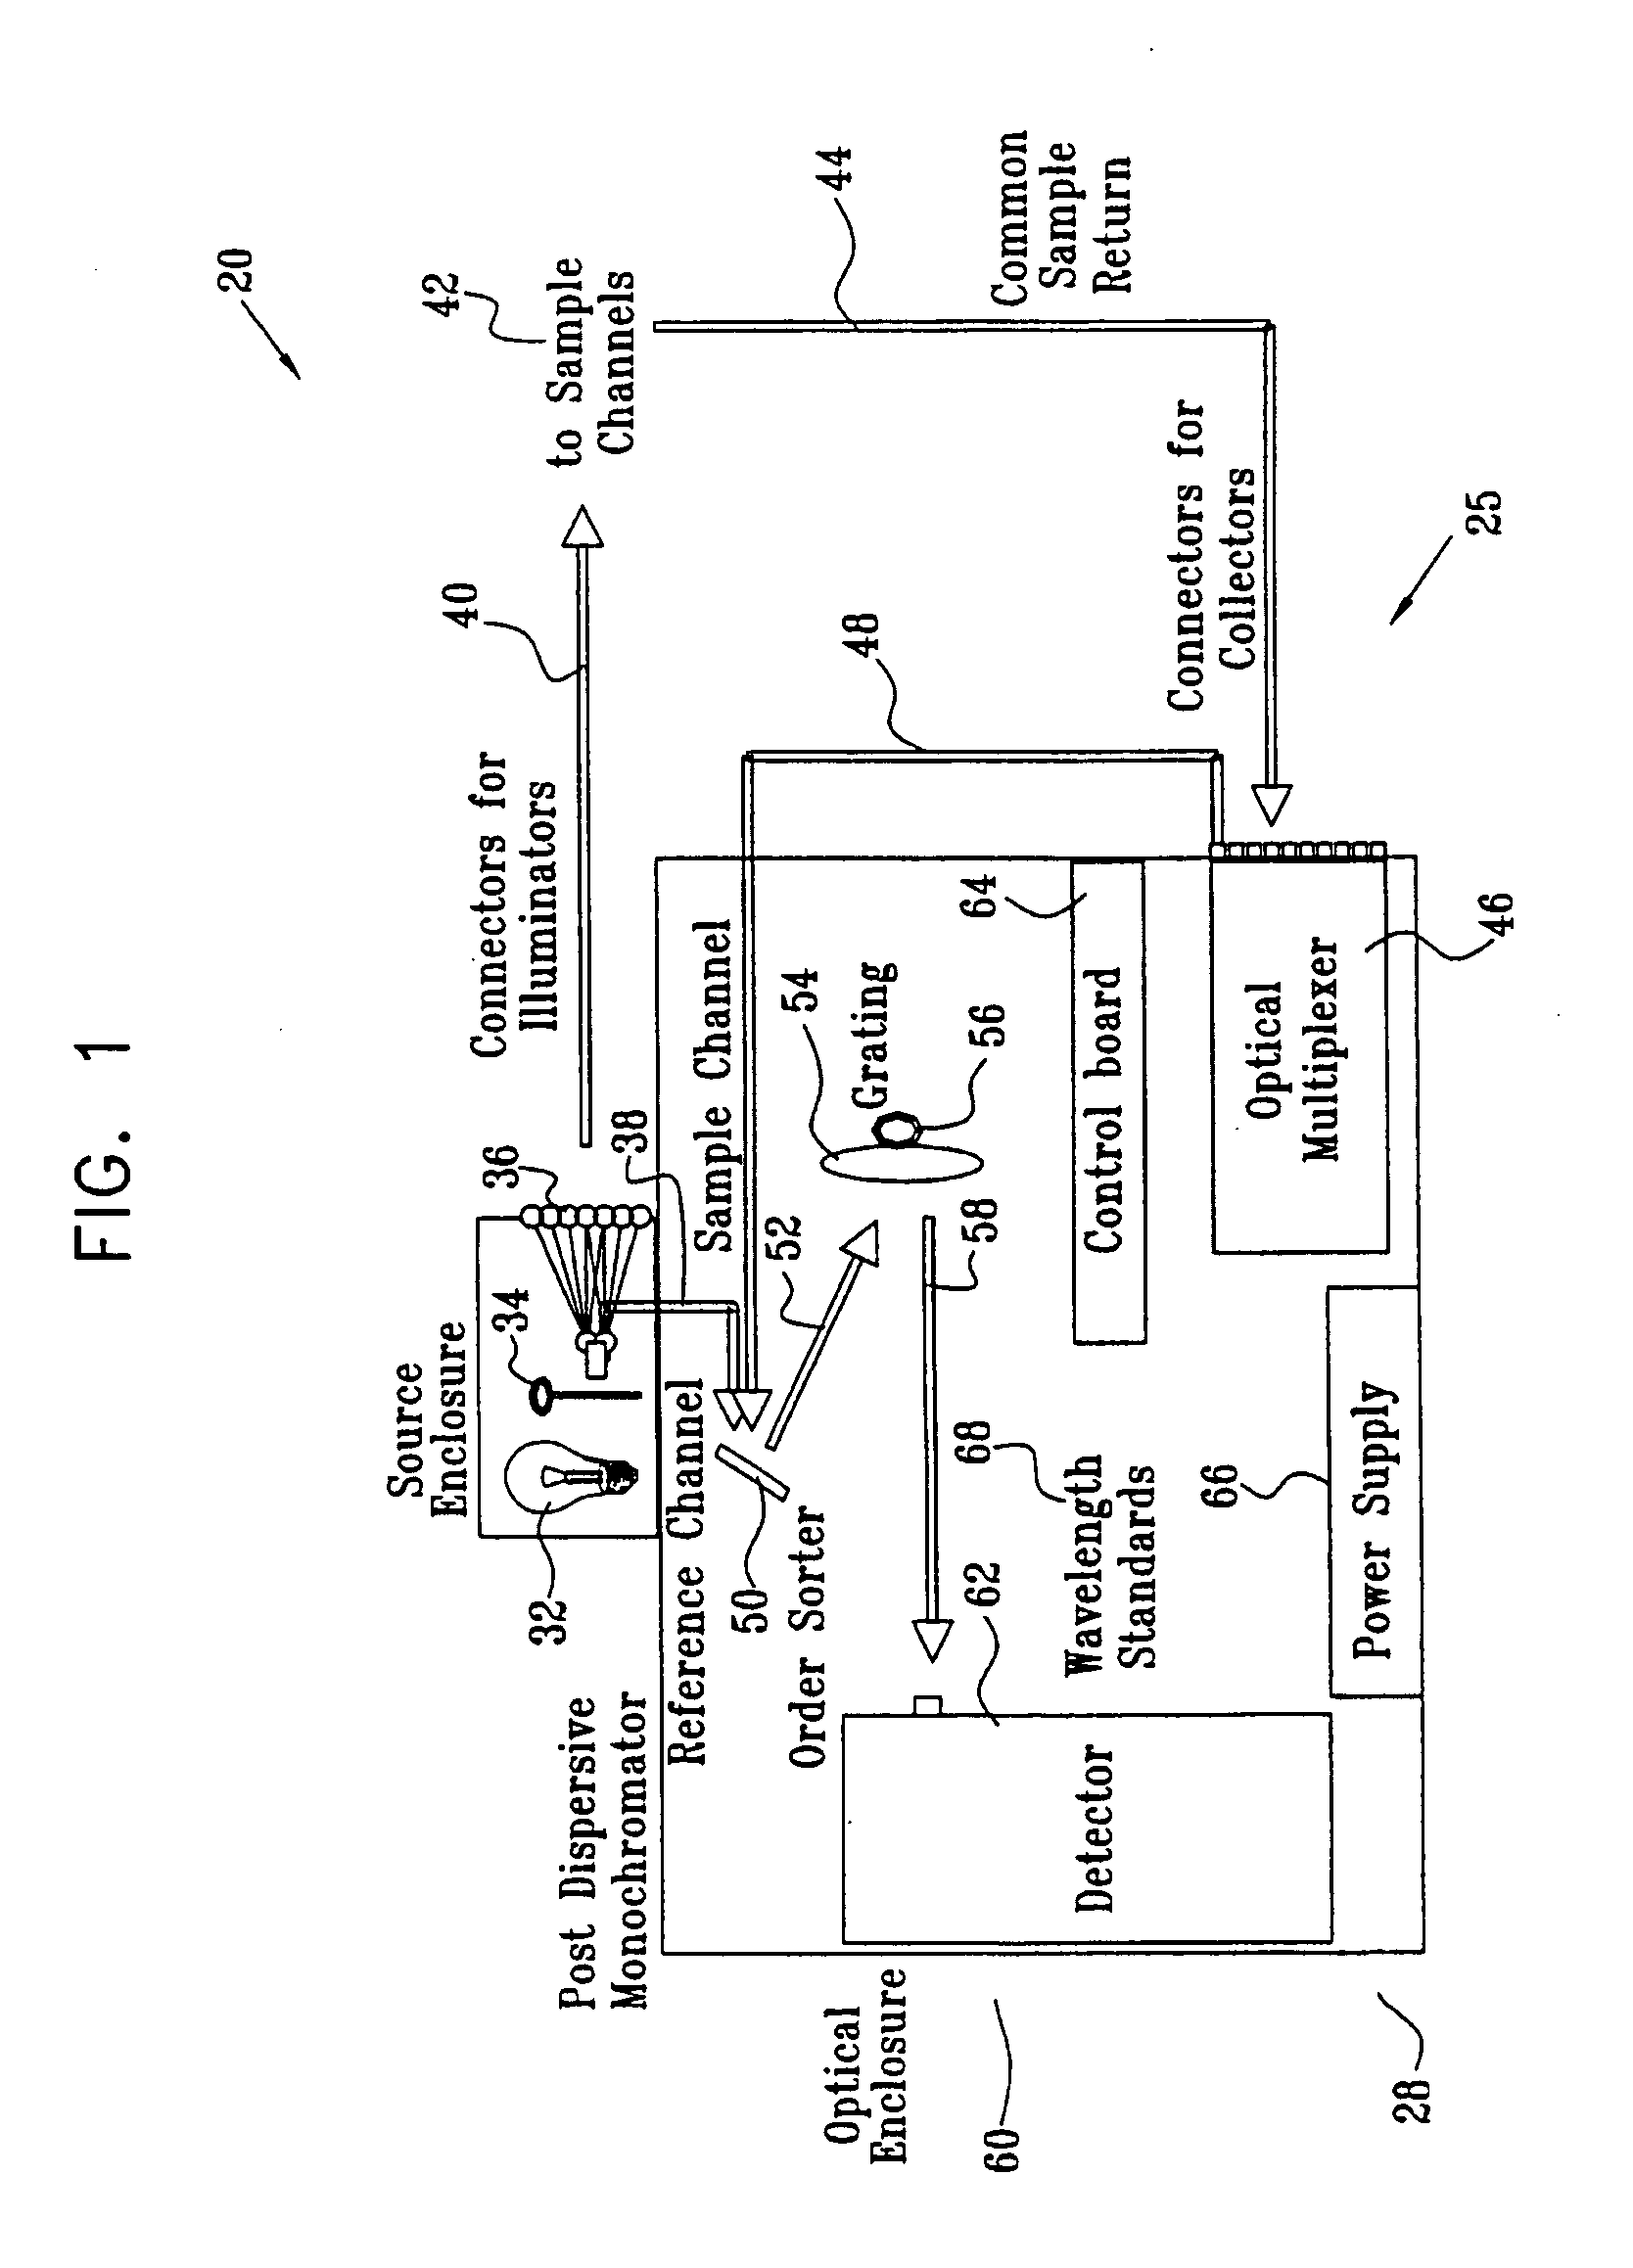 Method and apparatus for real-time dynamic chemical analysis